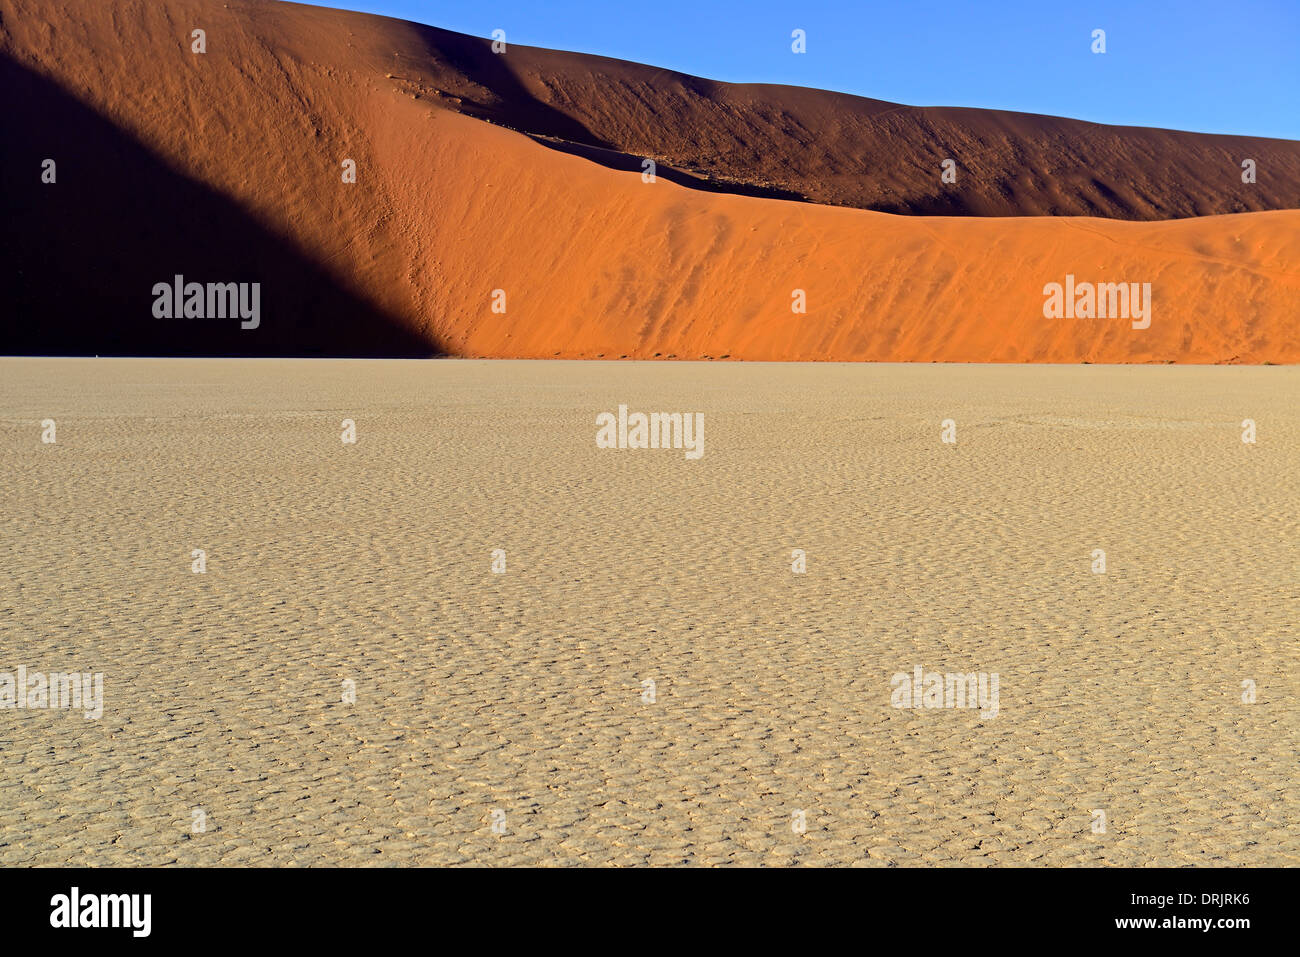 Width, dunes and mucky ground of the Deadvlei, Dead Vlei in the morning of the Namib Naukluft national park, Sossusvlei, Namibia Stock Photo